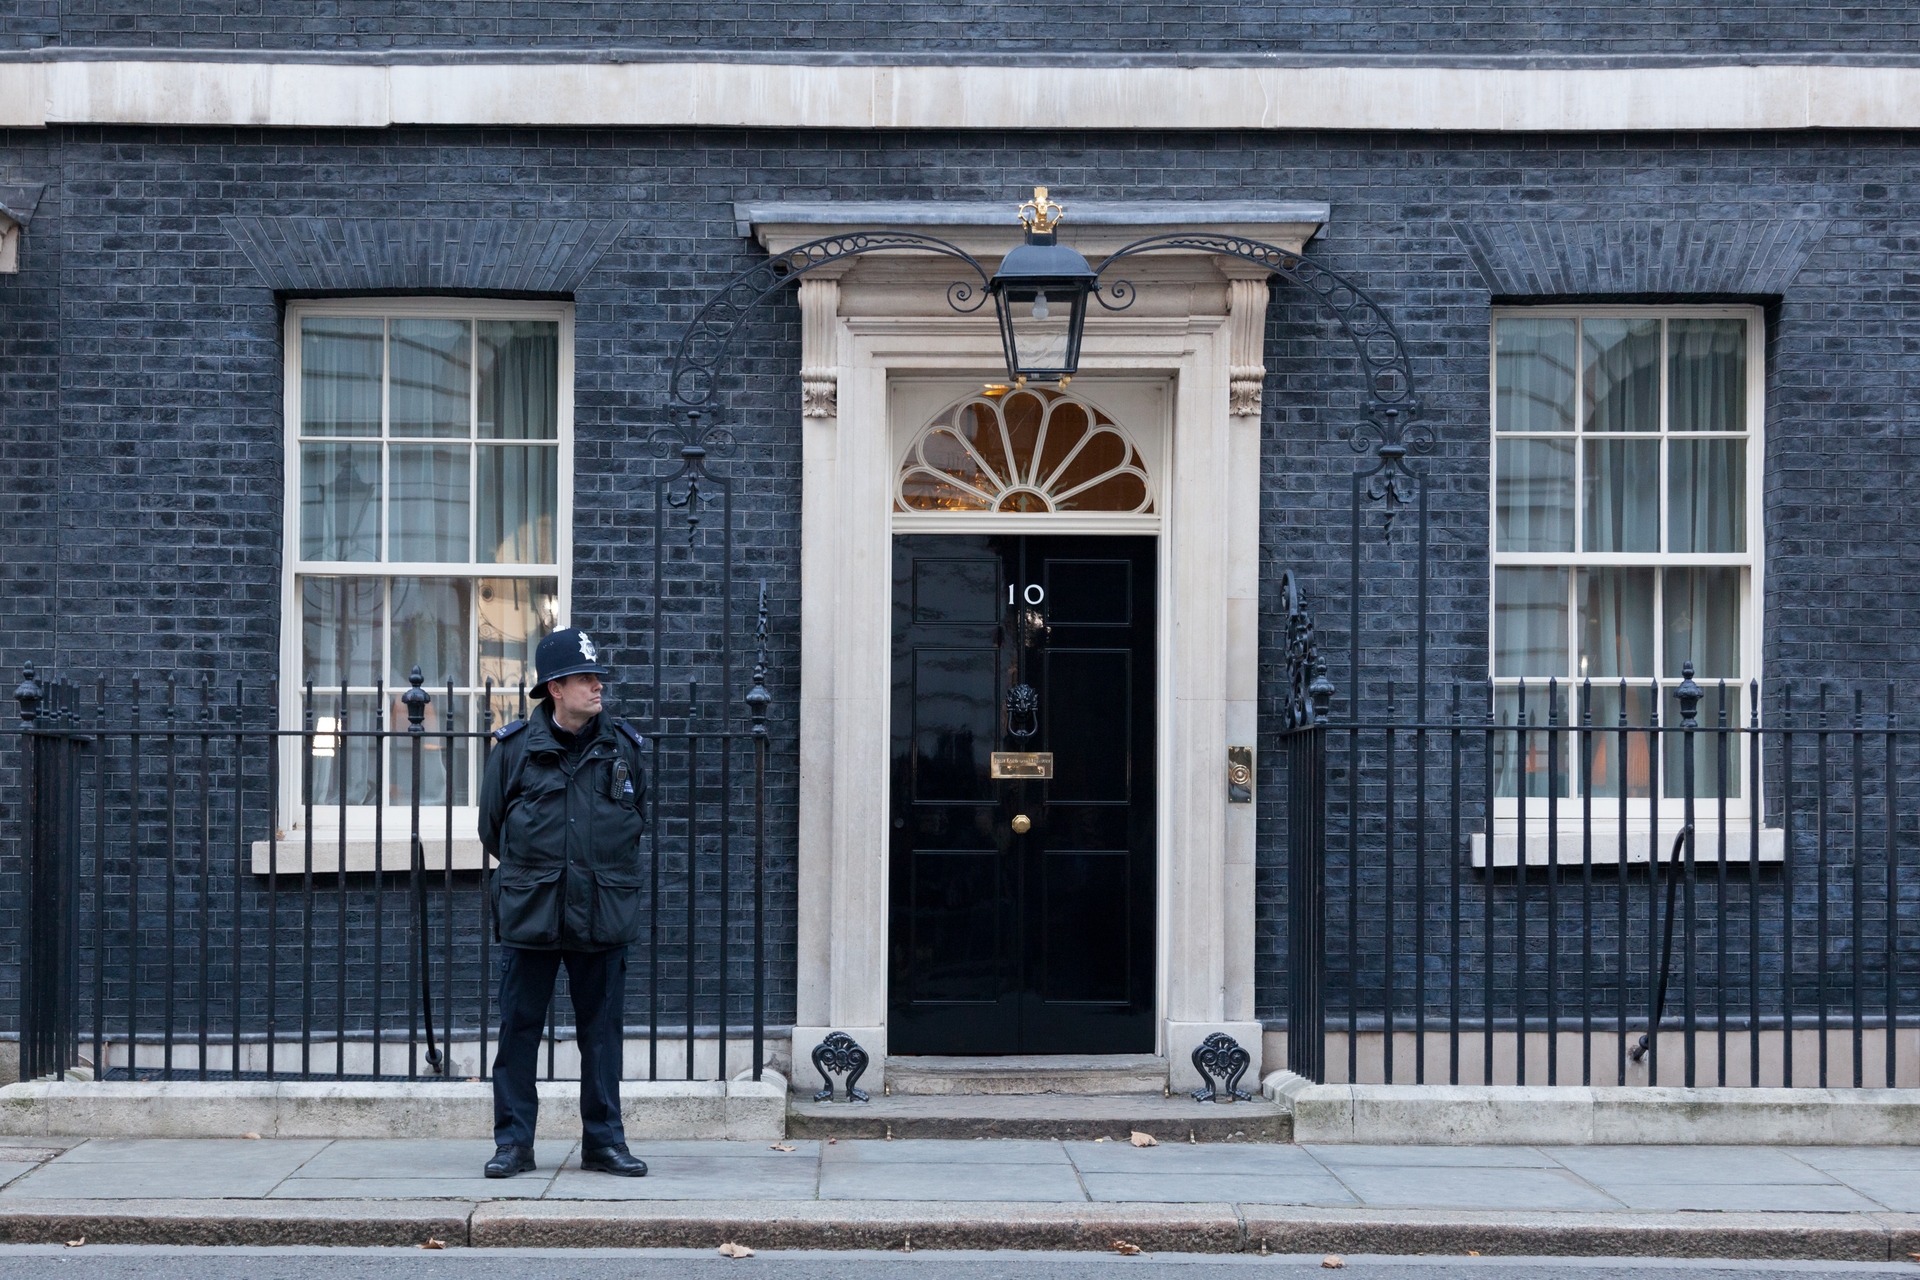  Police concluded that coronavirus laws were broken following an inquiry into lockdown parties in Downing Street.